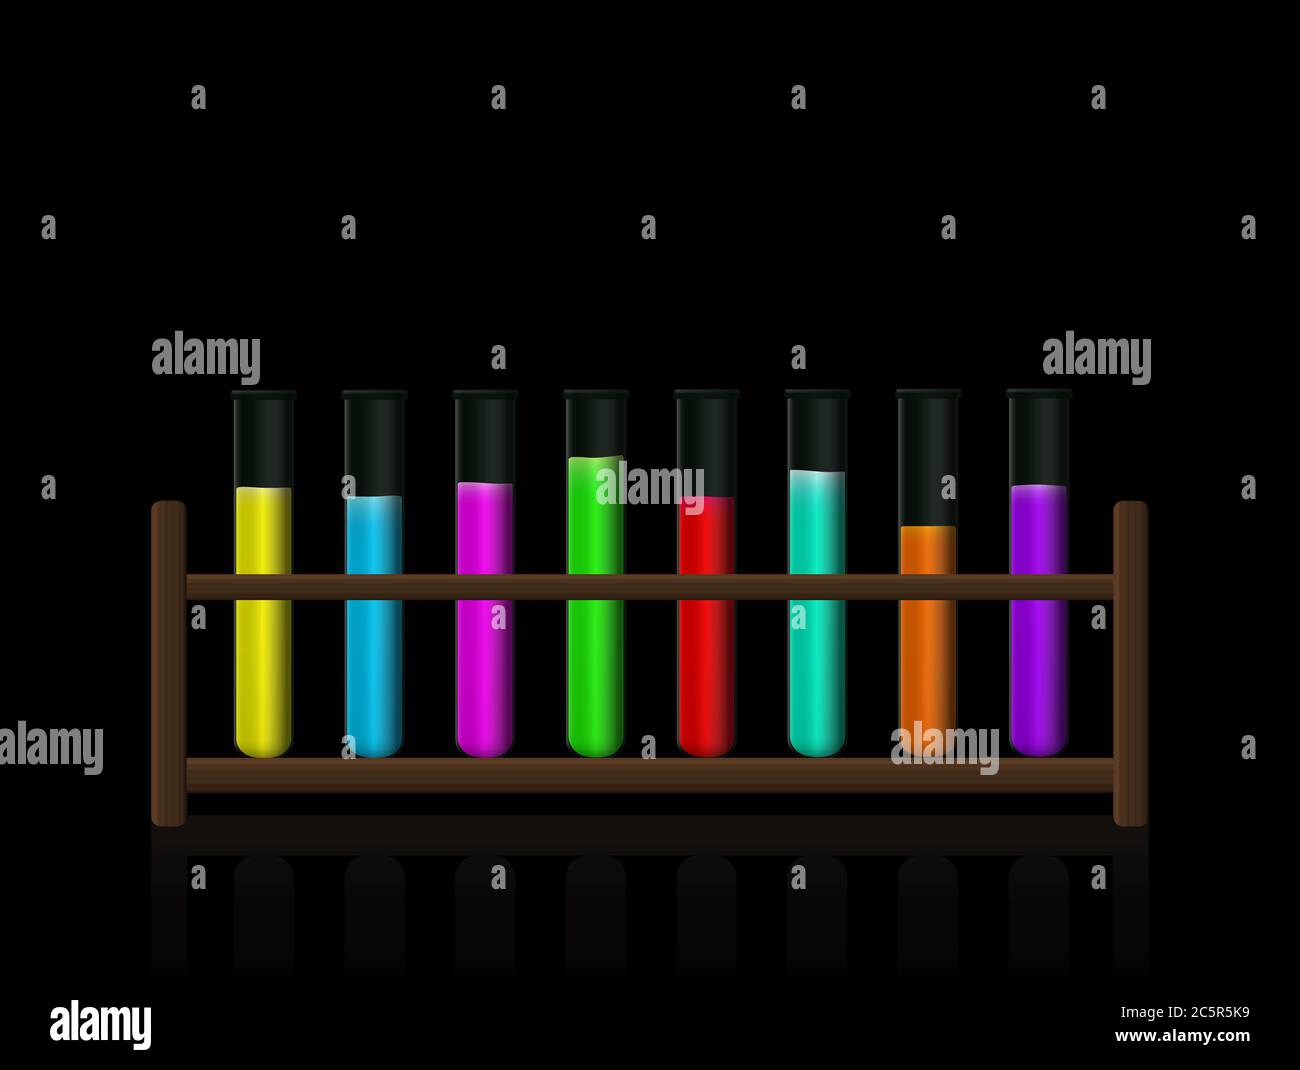 Chemical substances. Neon colored fluorescent toxic liquids in a test tube rack. Wooden holder with radiant colored fluids in eight laboratory glasses. Stock Photo